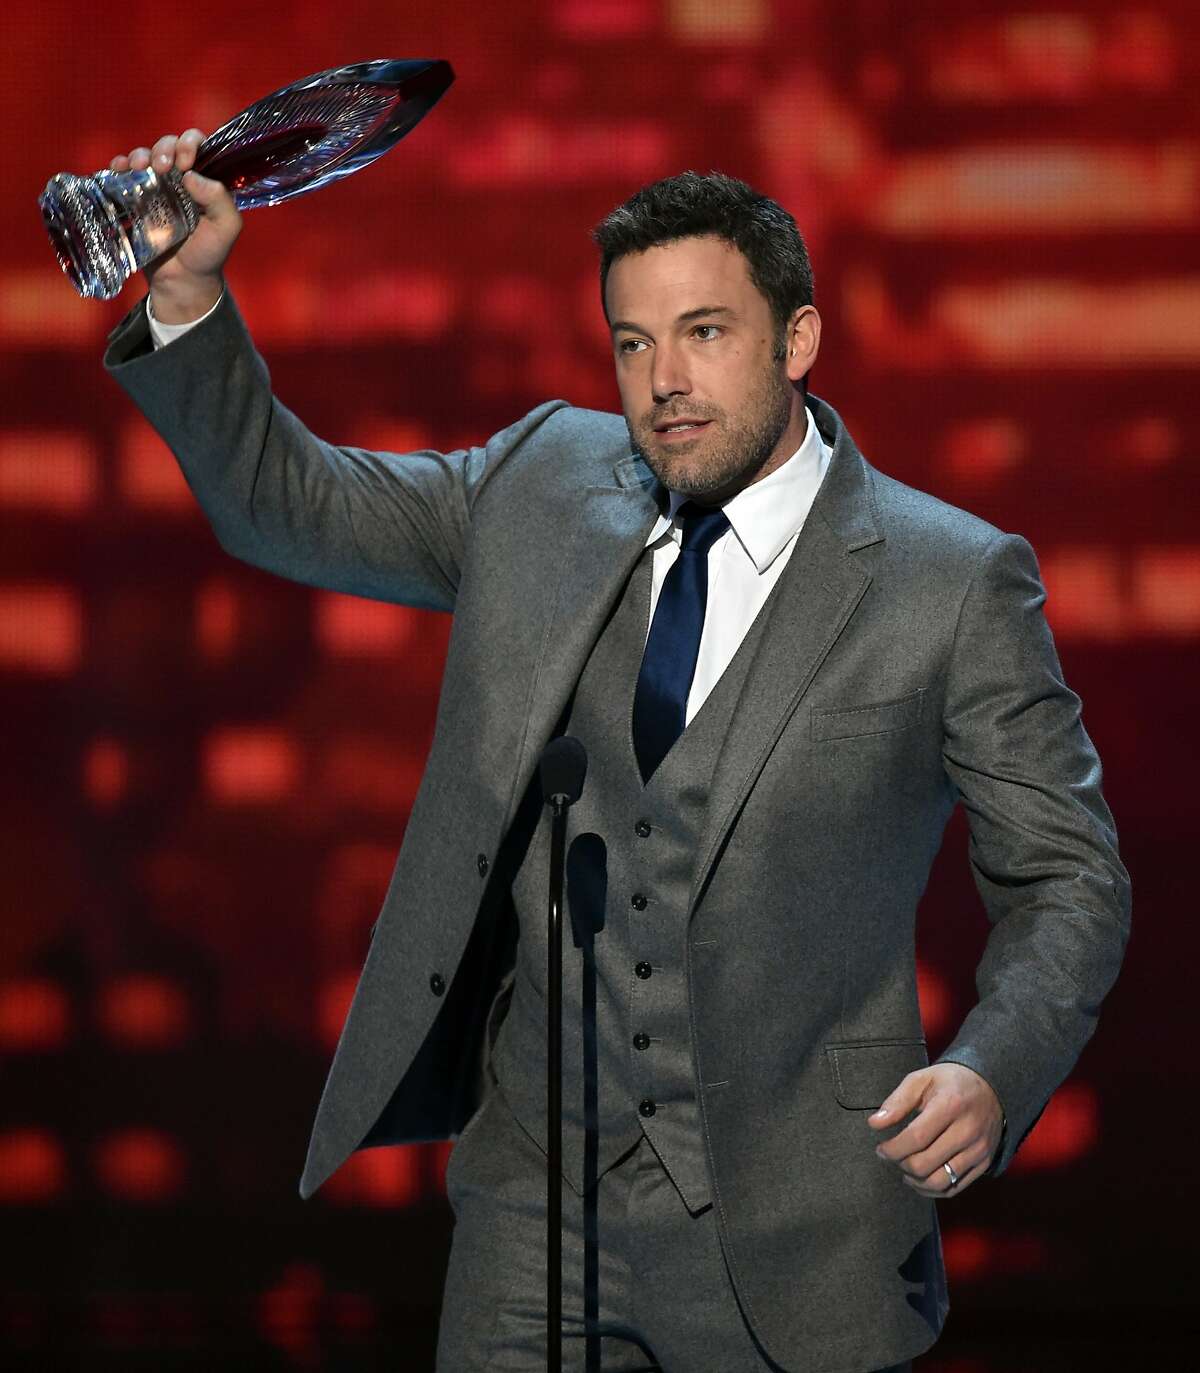 Ben Affleck Affleck may be Mr. Massachusetts, but he was actually born in Berkeley. He moved to Cambridge, Mass., as a youngster.